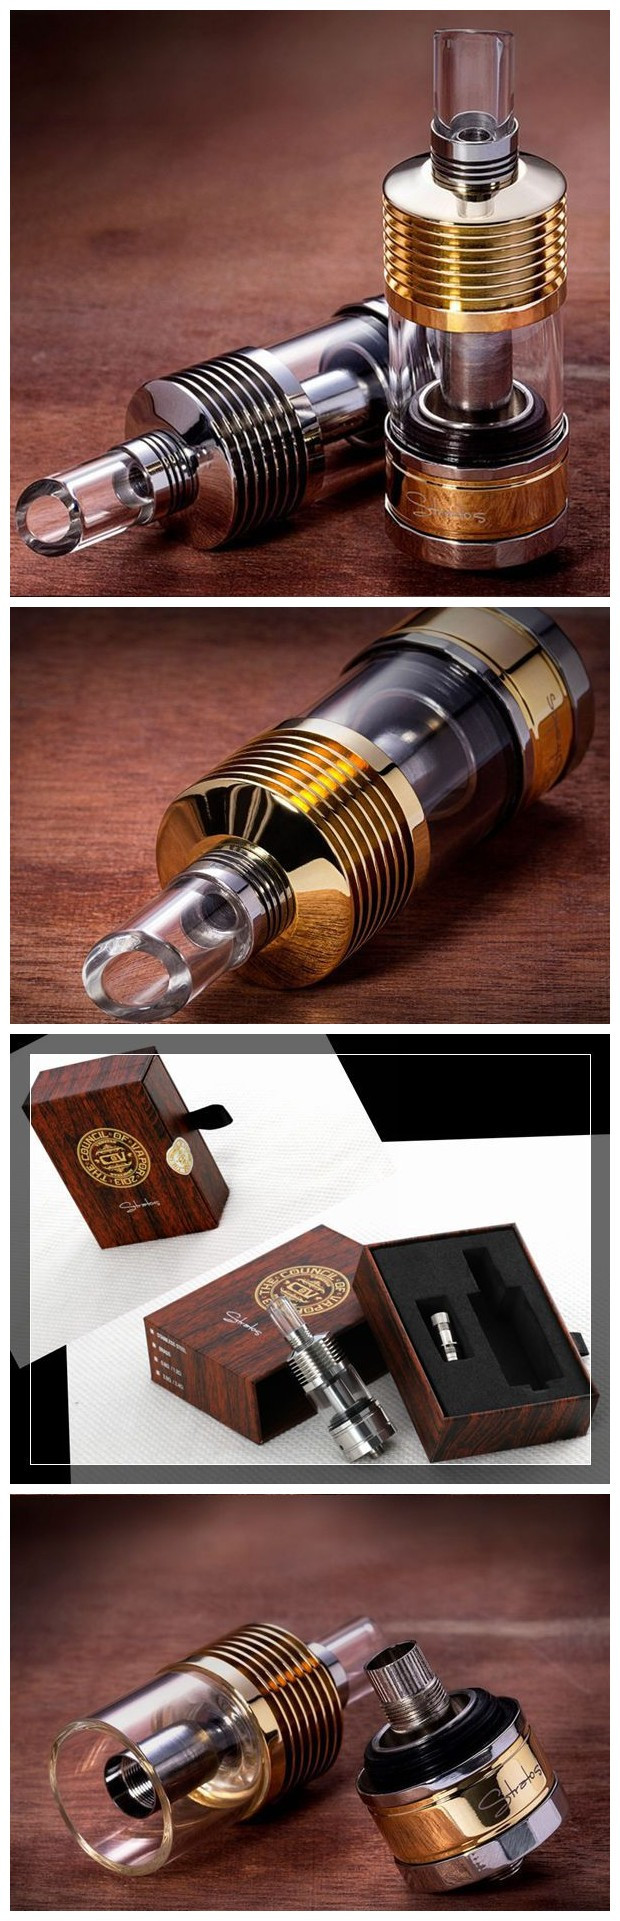 Hangsen Hot Selling Stratos Clearomizer E-Cigarette with Replaceable Coil Head Made in The Us